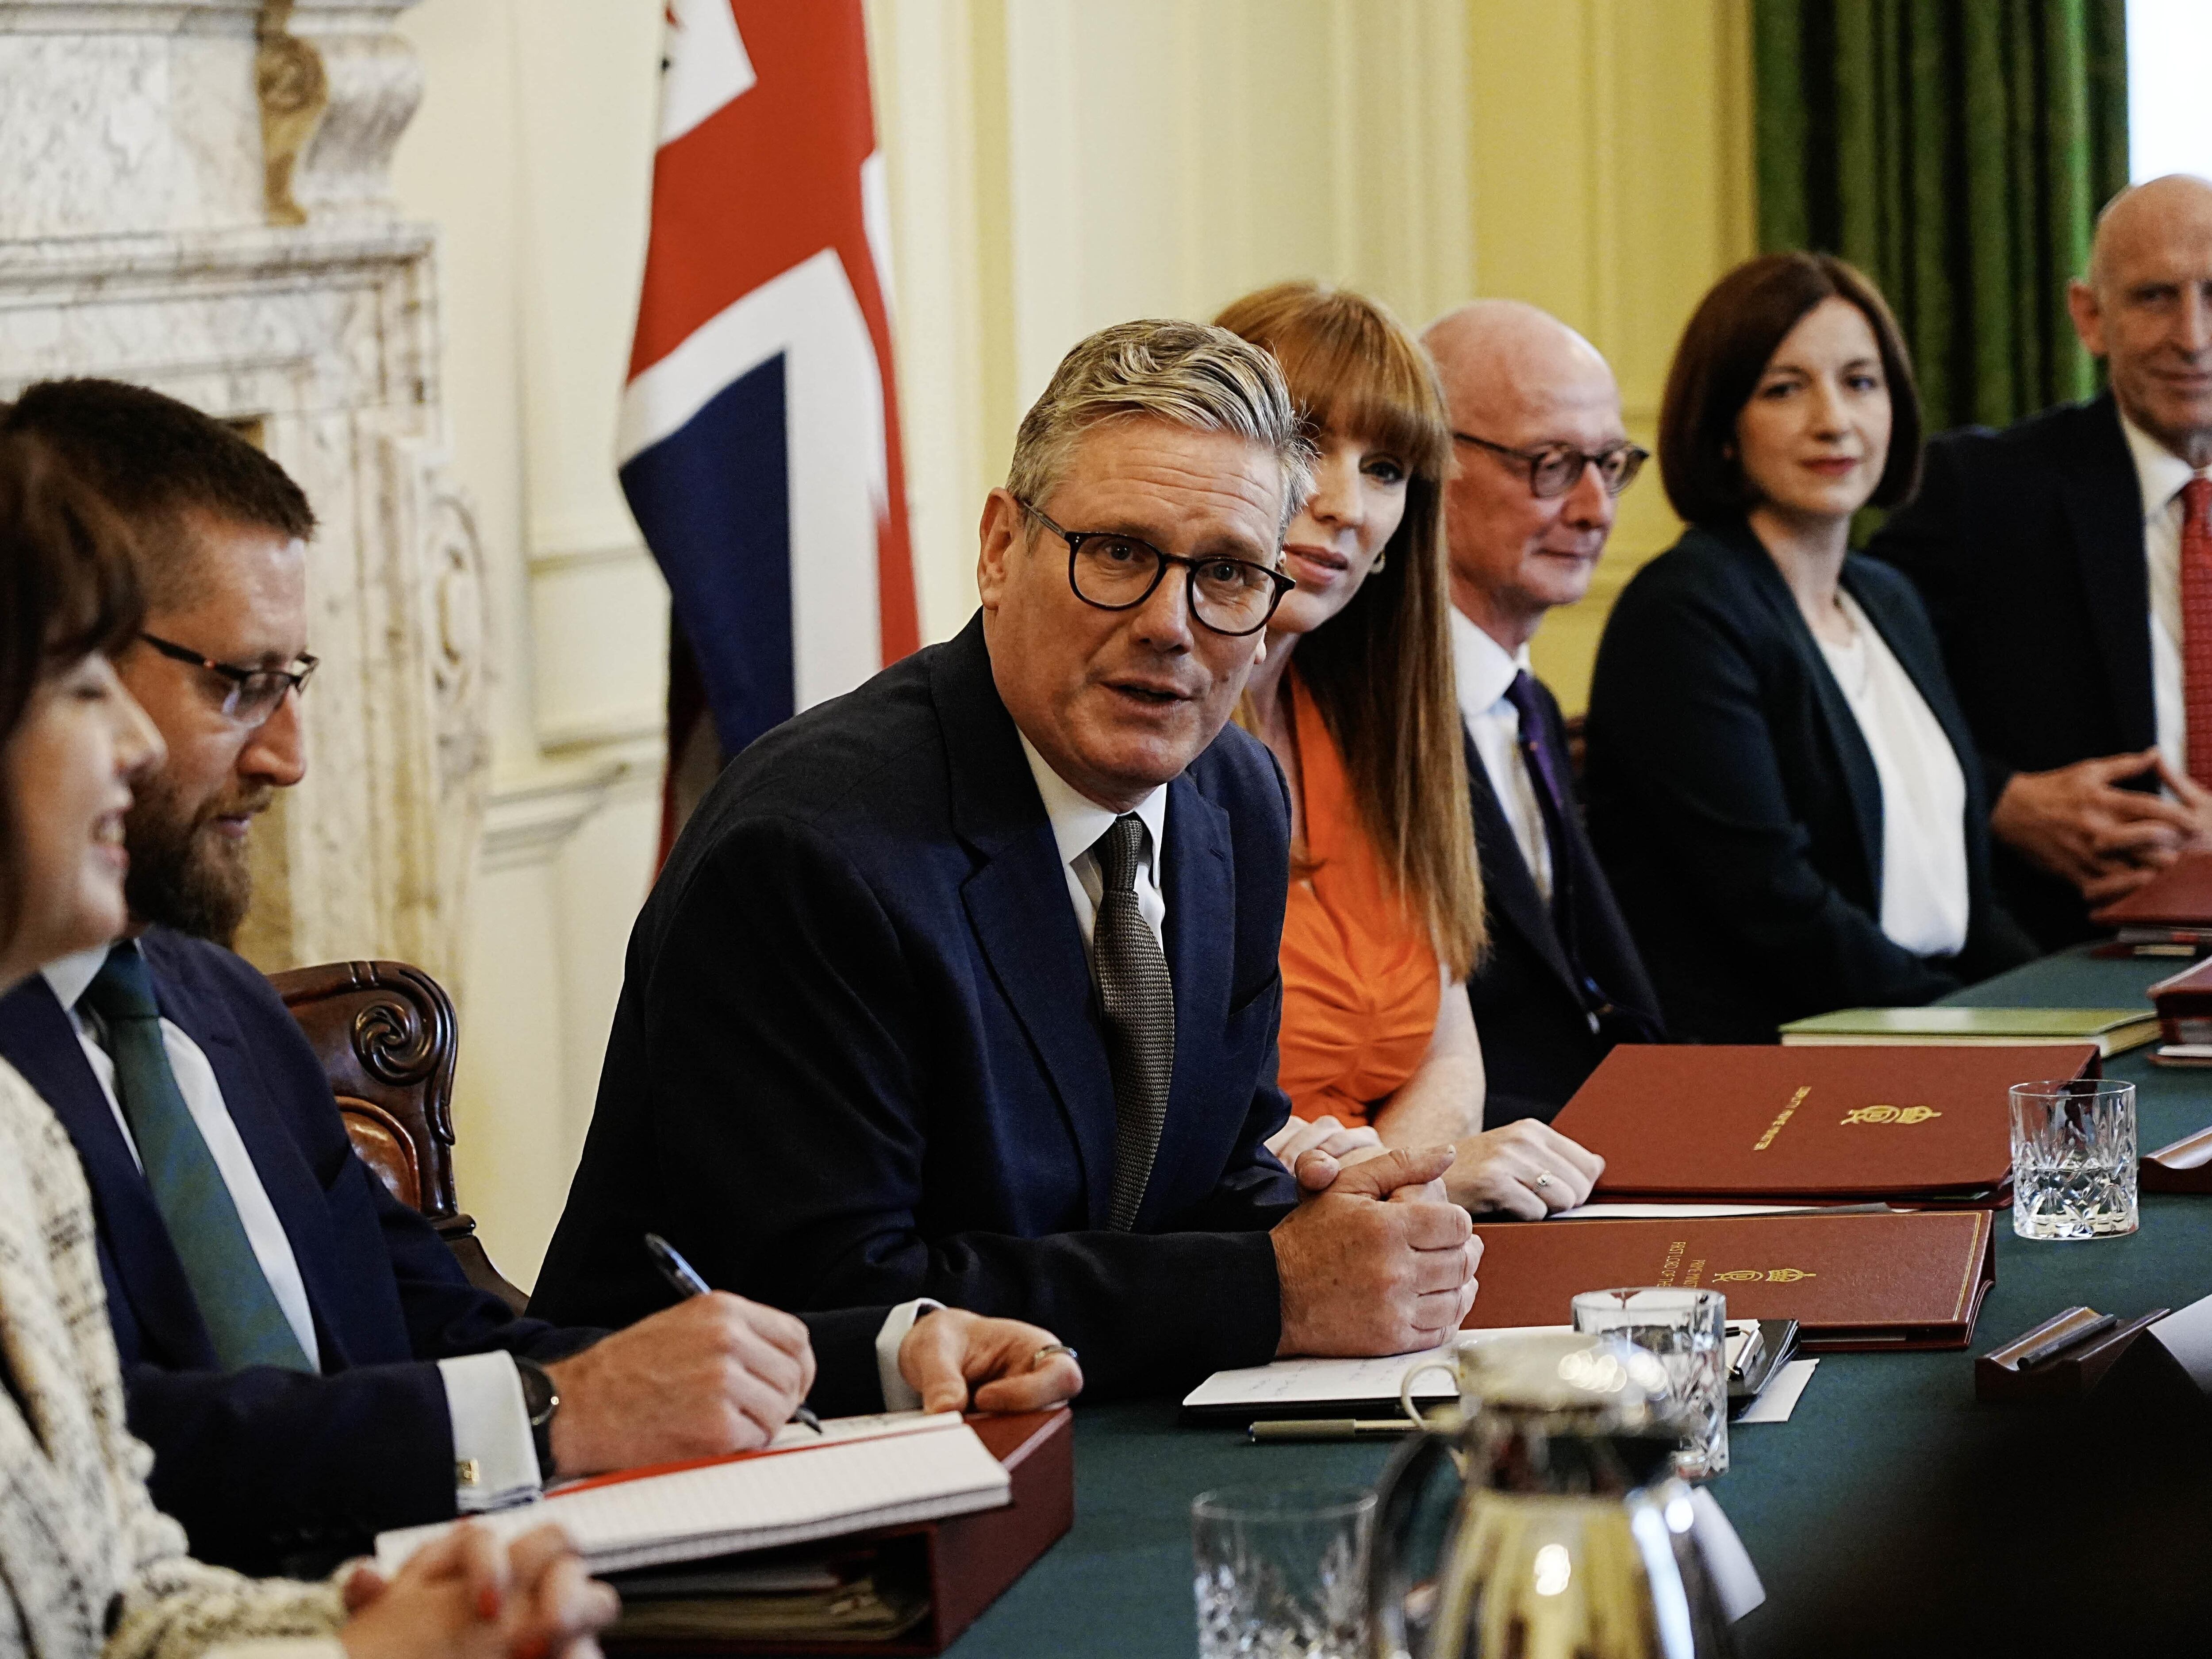 Huge amount of work to do, Starmer tells ministers at first Cabinet meeting